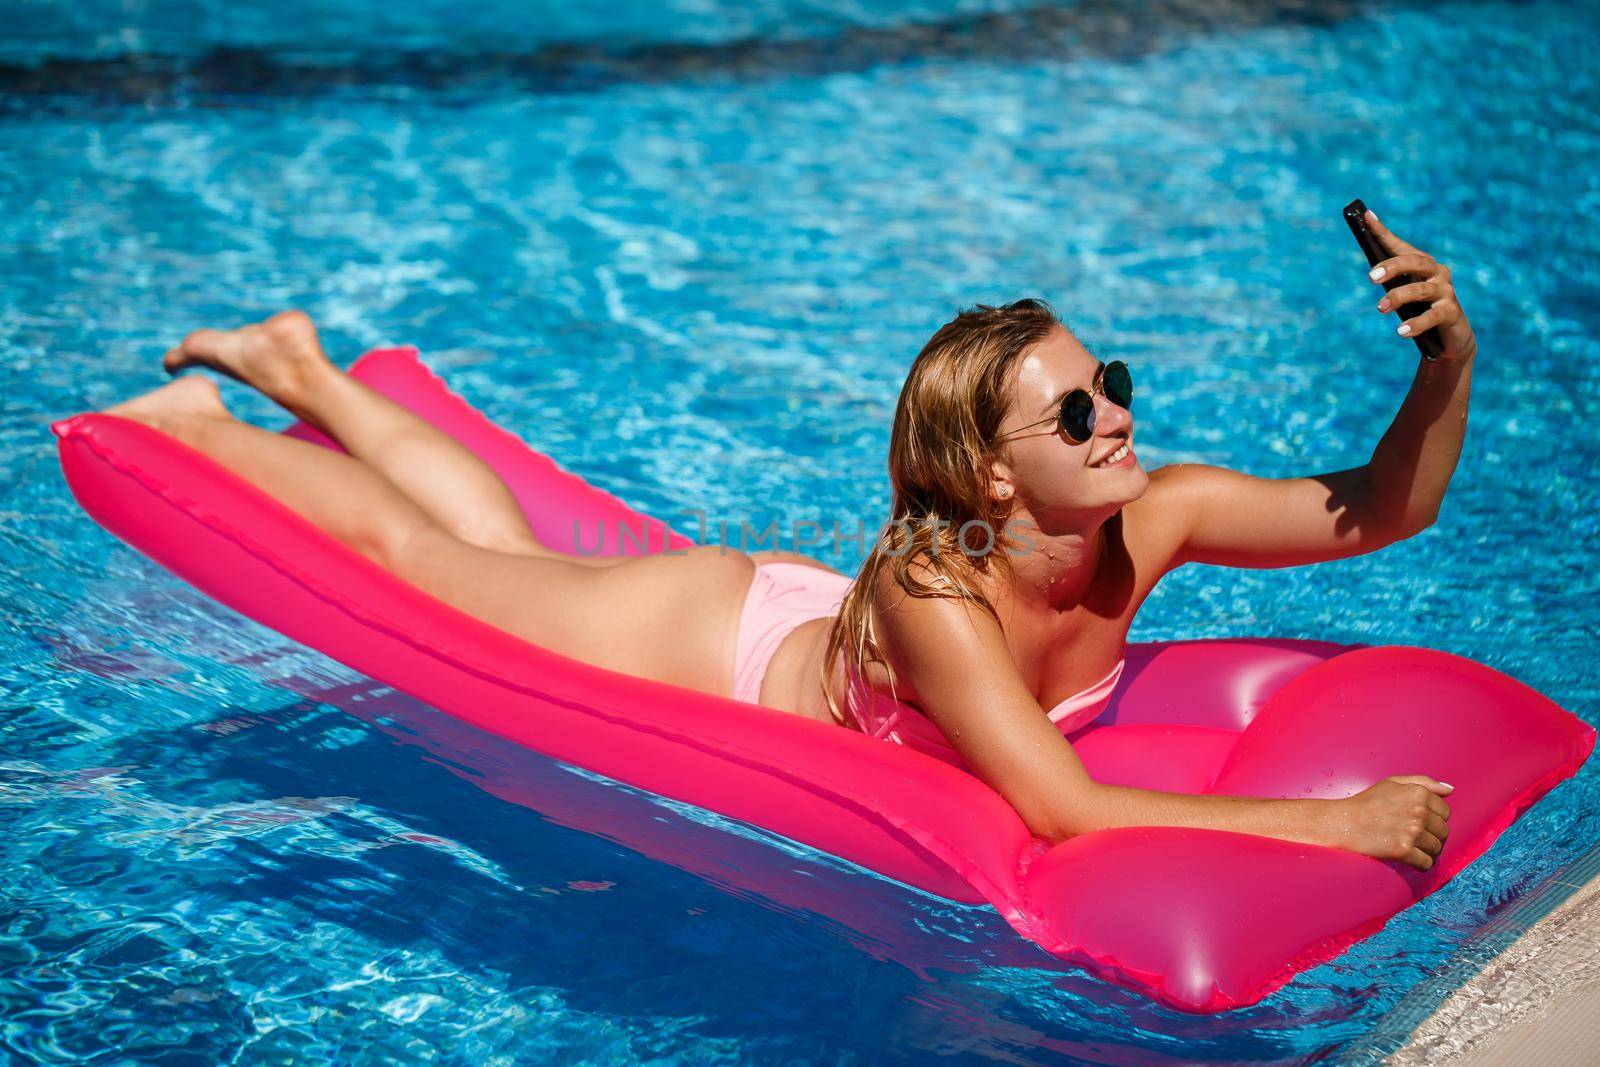 Sexy woman with a phone in a swimsuit lies on a pink inflatable mattress in the pool. Relax by the pool on a hot summer sunny day. Vacation concept by Dmitrytph